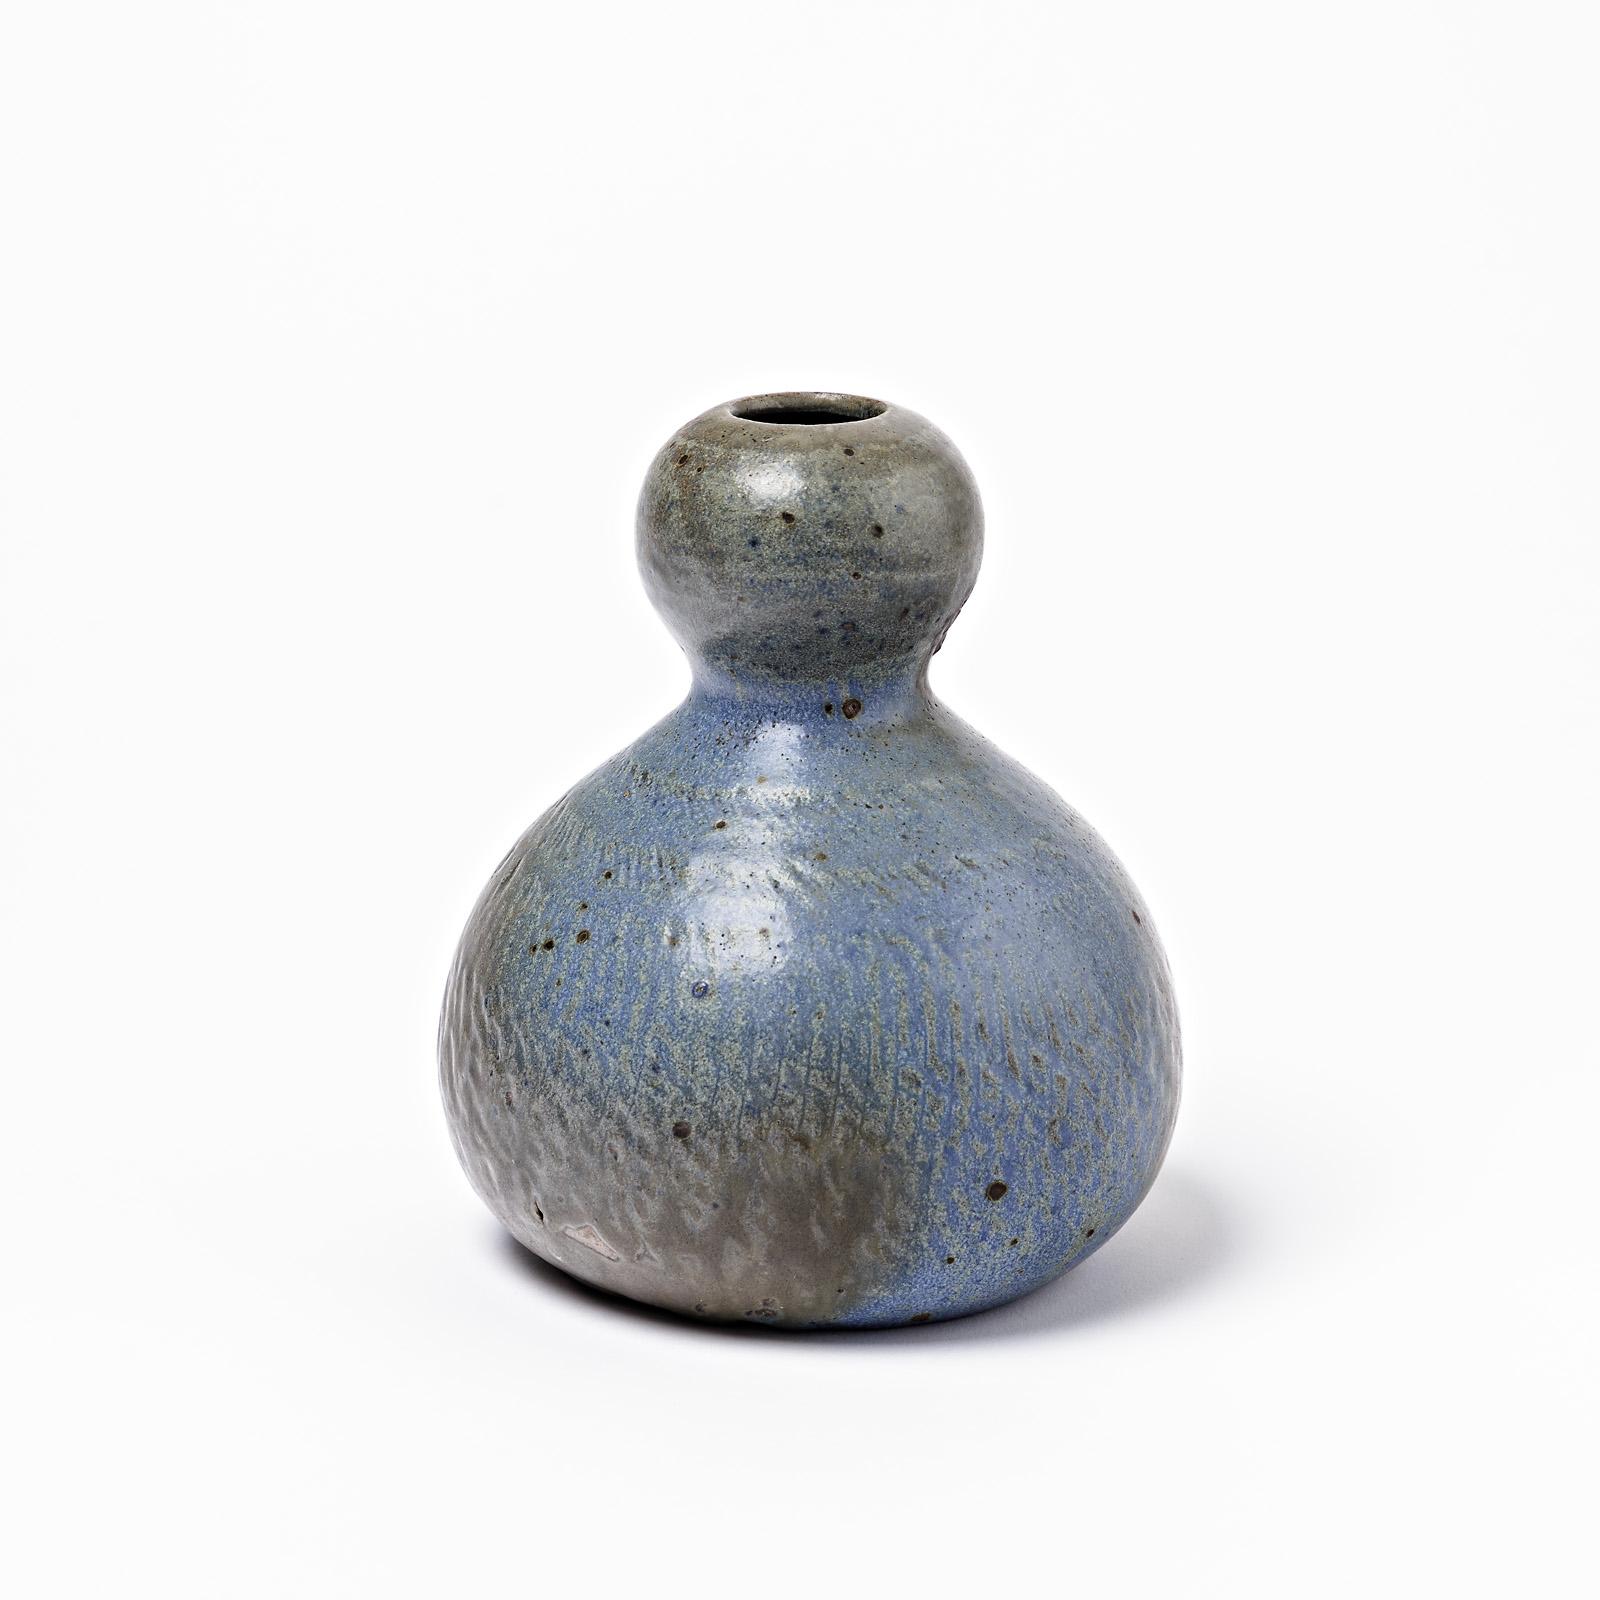 A ceramic vase with blue and brown glazes decoration by Théo Perrot.
Perfect original conditions.
Signed under the base 